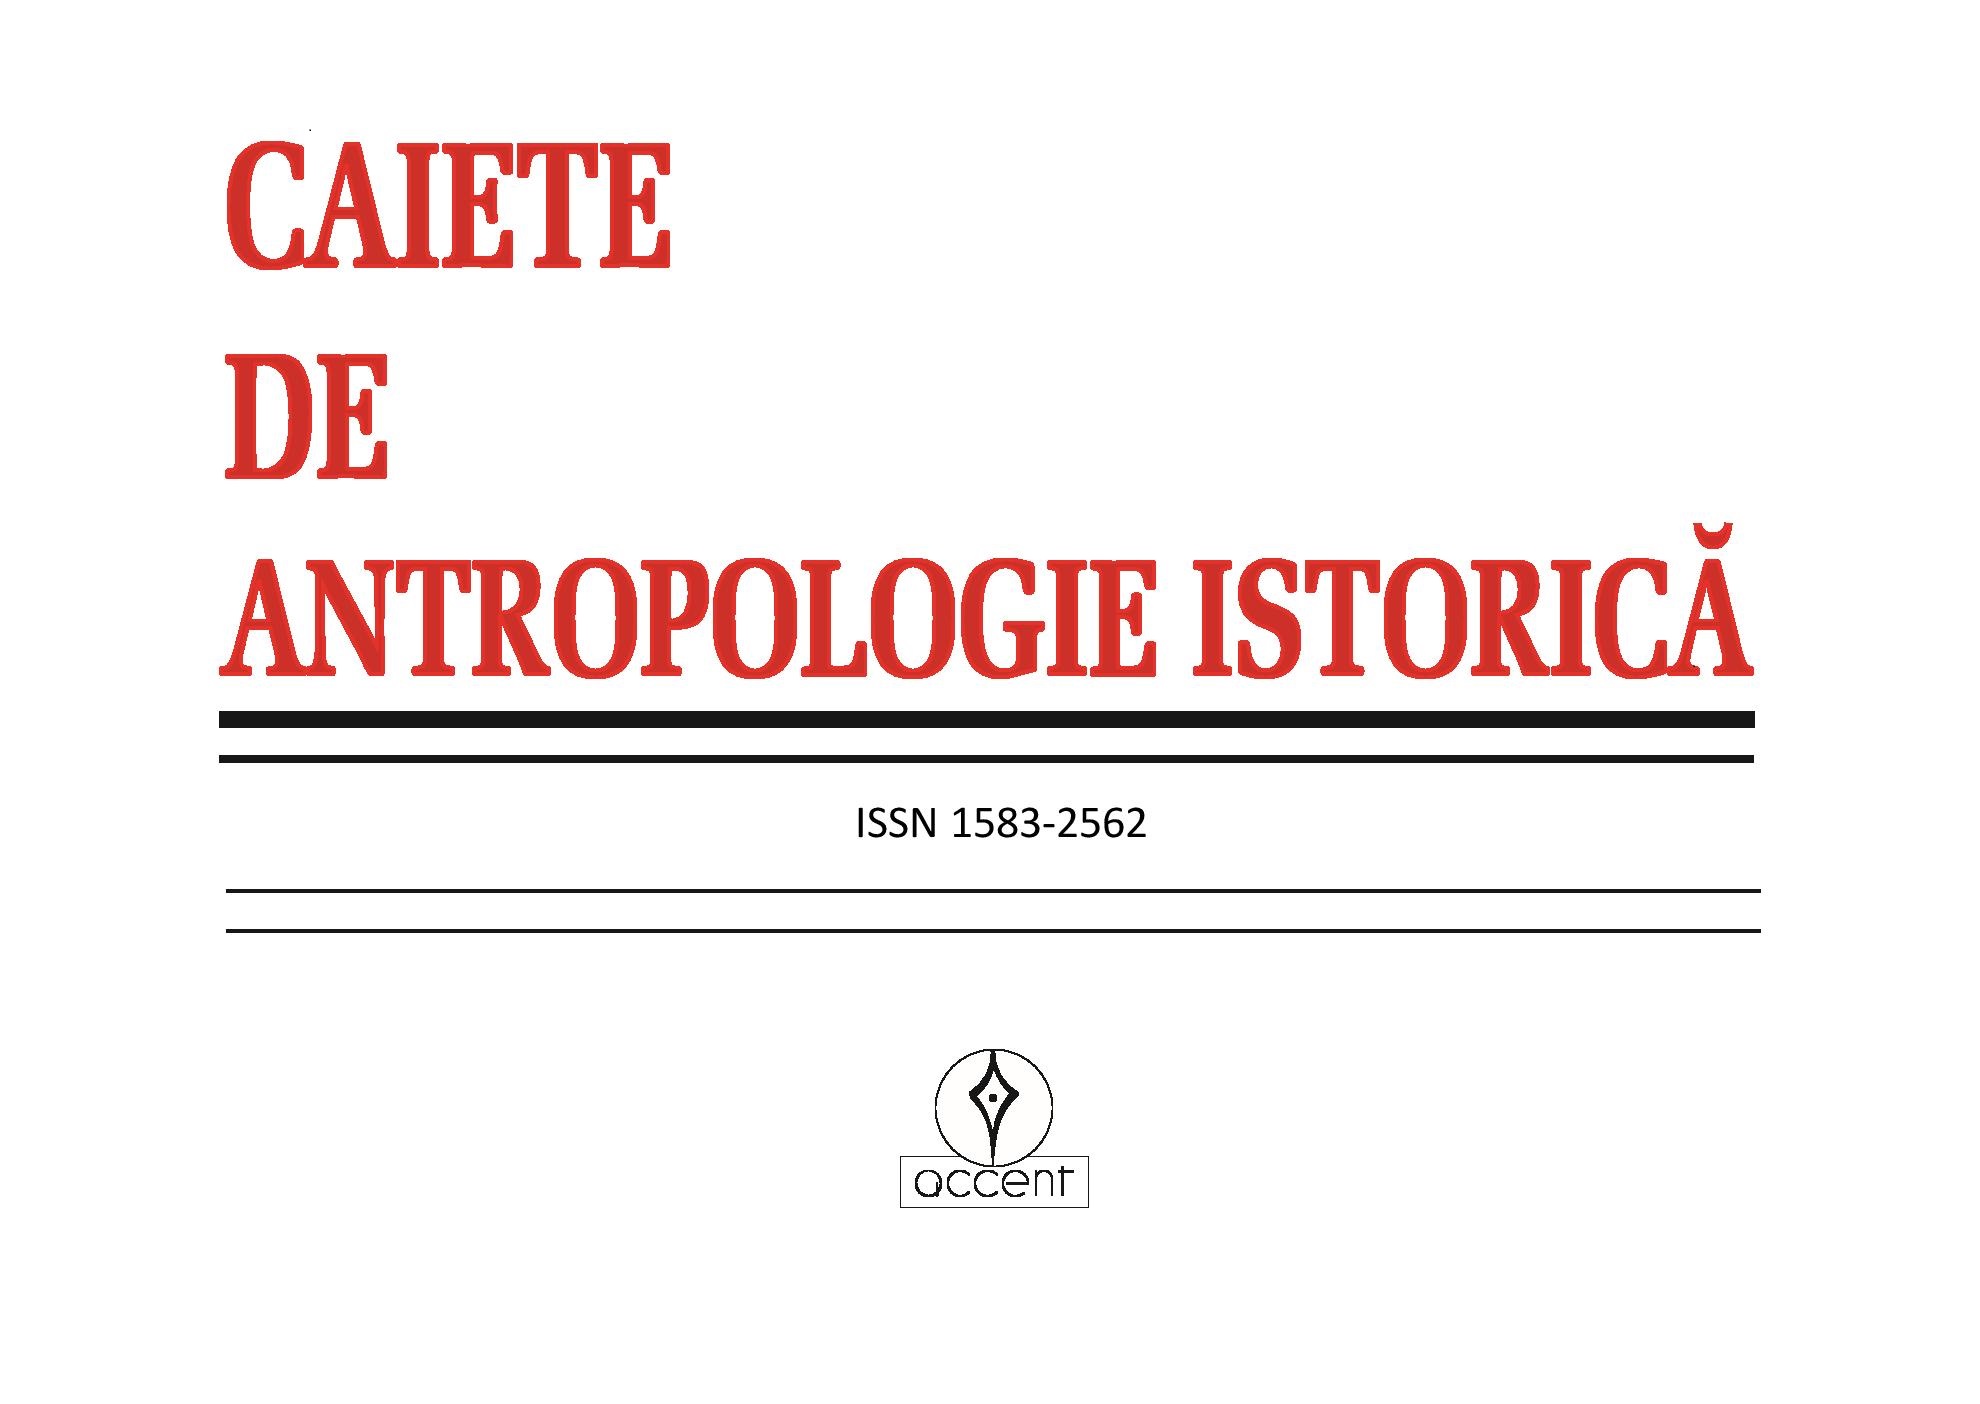 Journal of Historical Anthropology